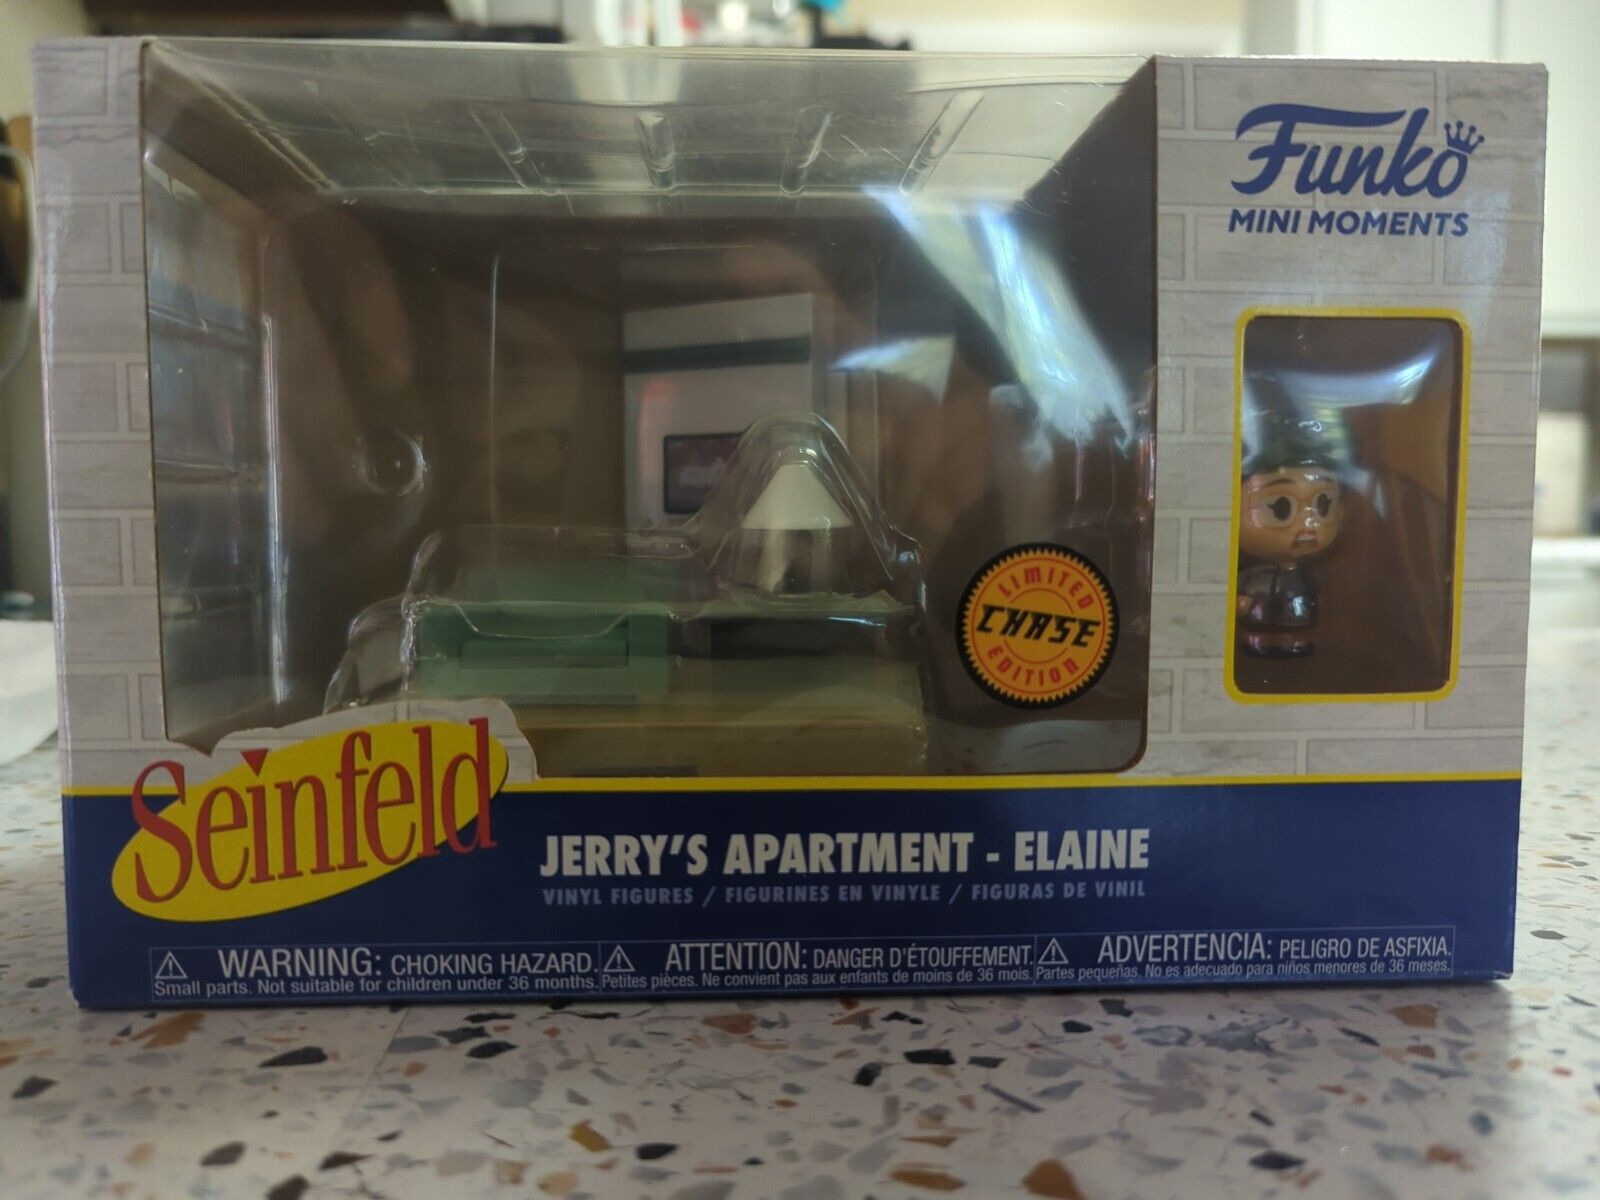 Funko Mini Moments Seinfeld Jerry's Apartment - Elaine Limited Edition Chase